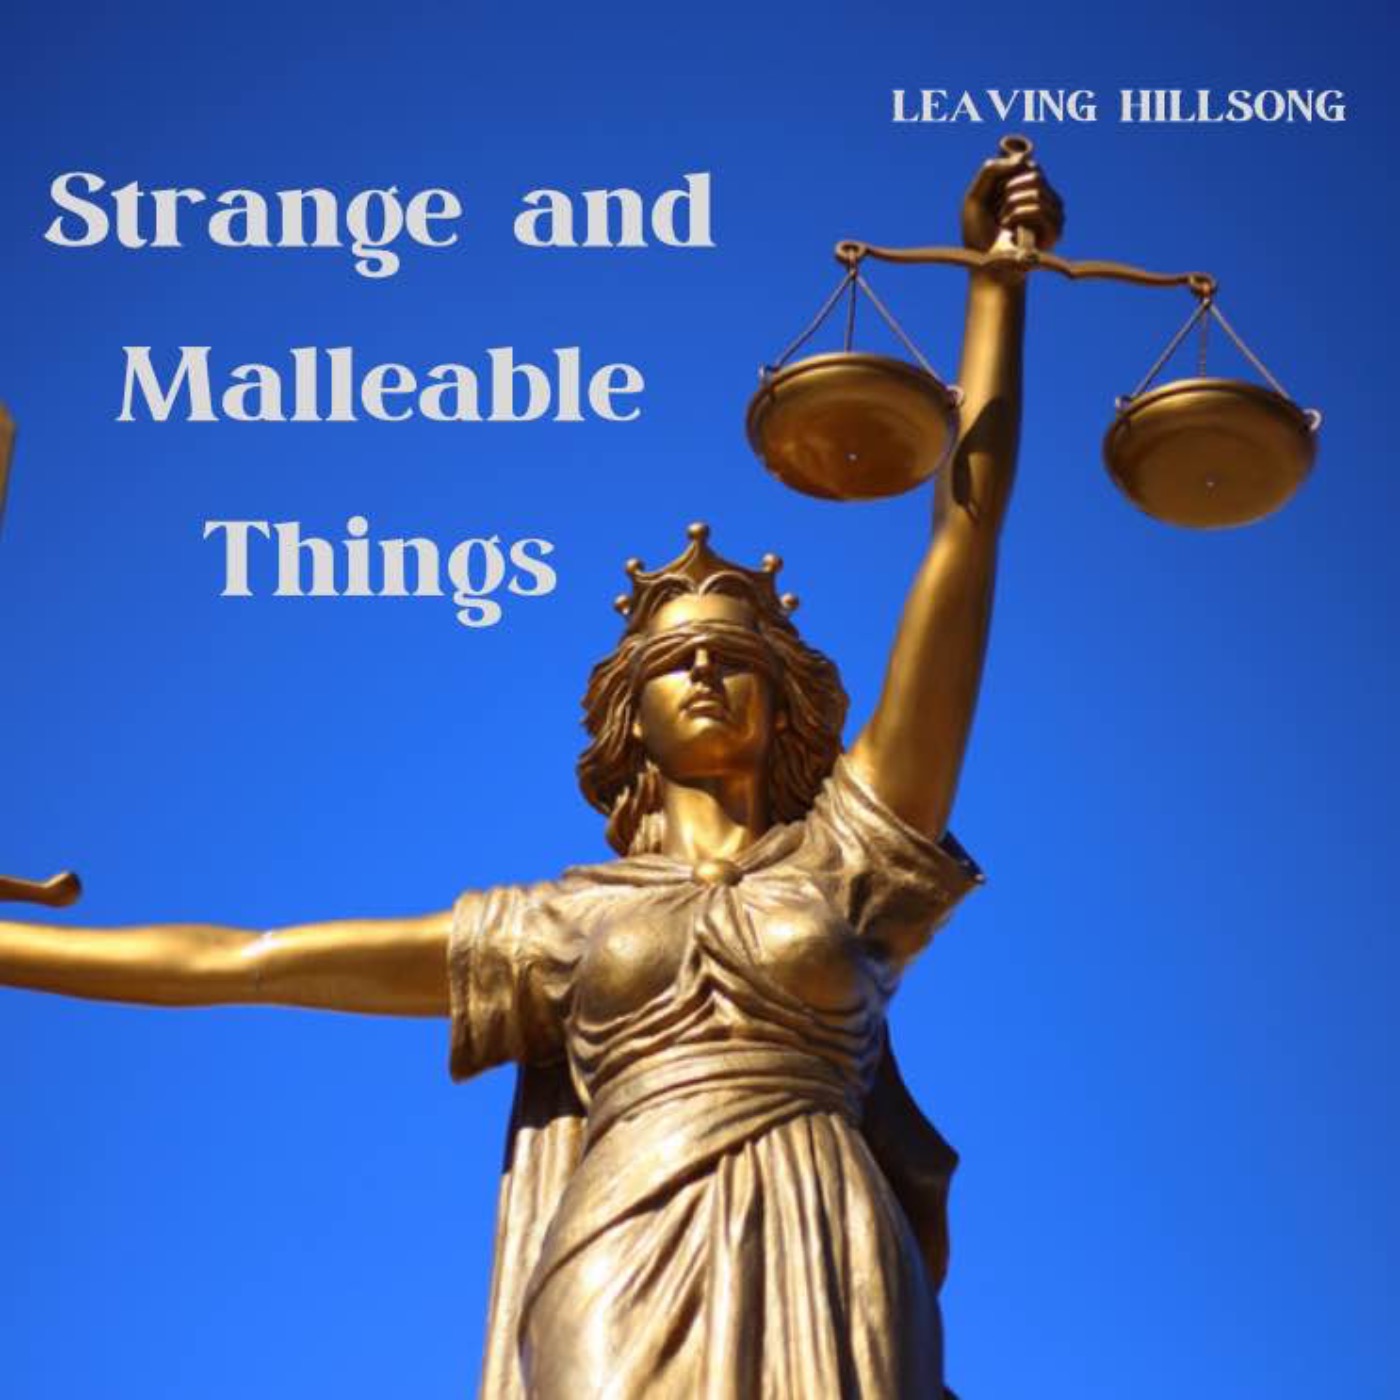 Strange and Malleable Things